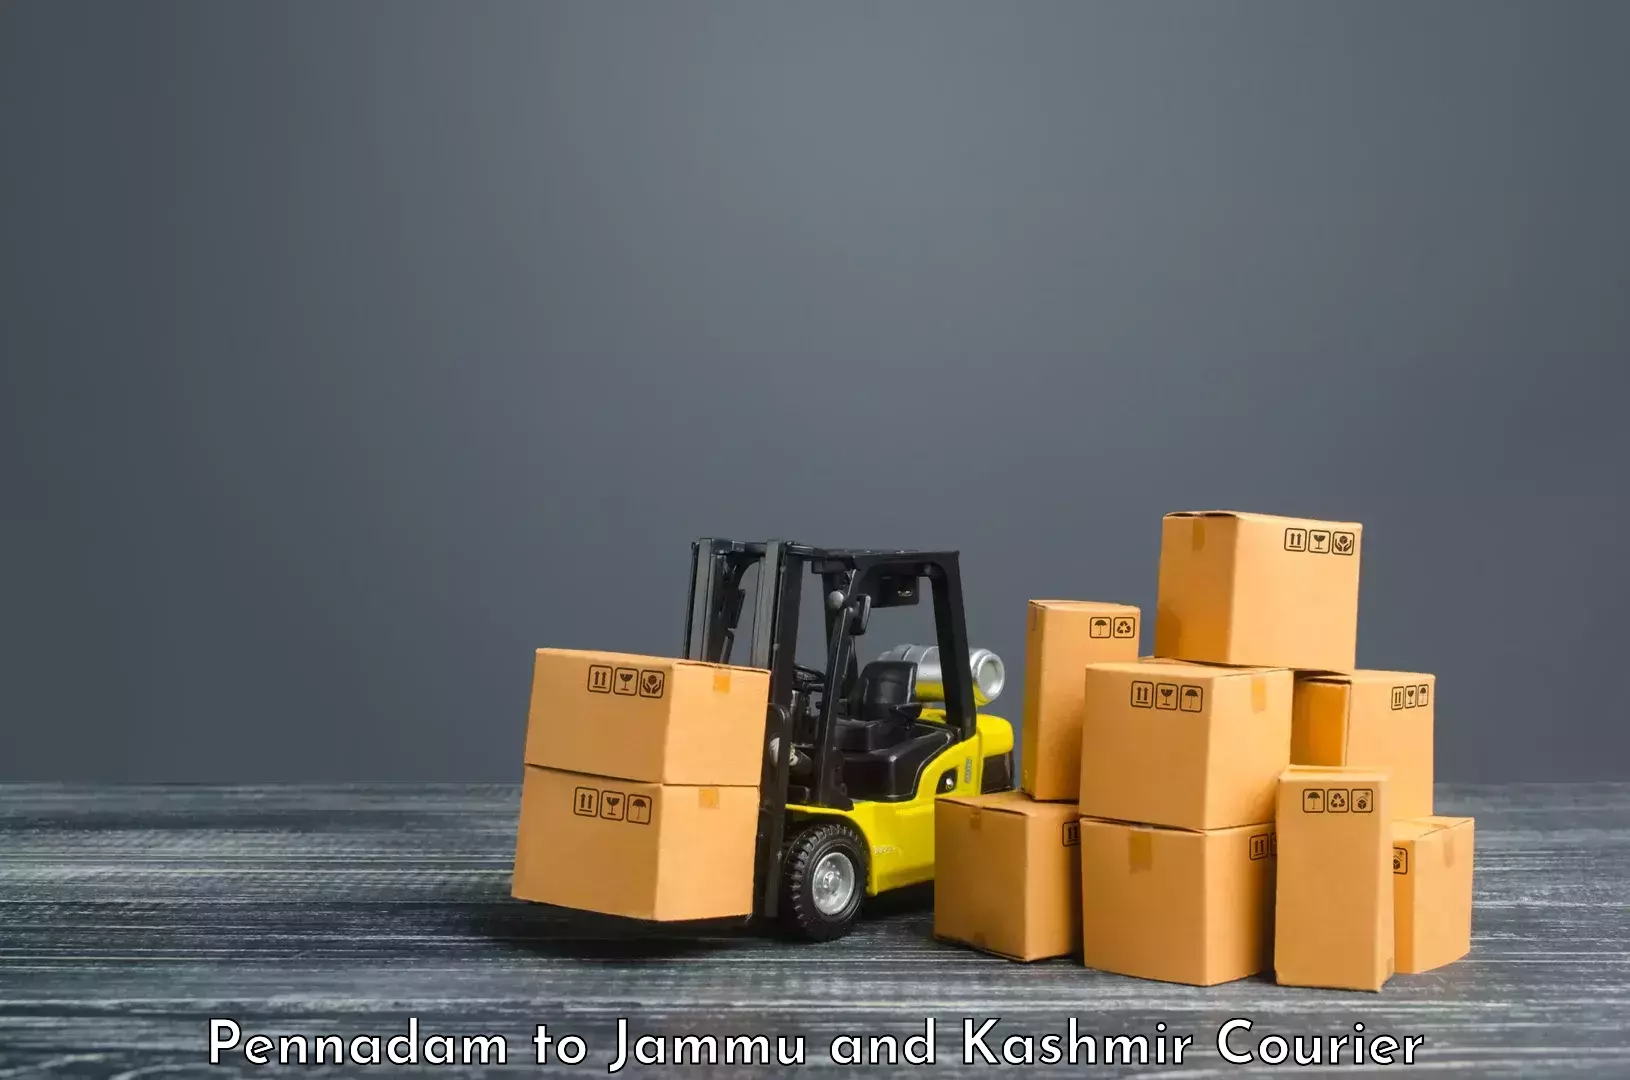 Efficient courier operations Pennadam to University of Jammu